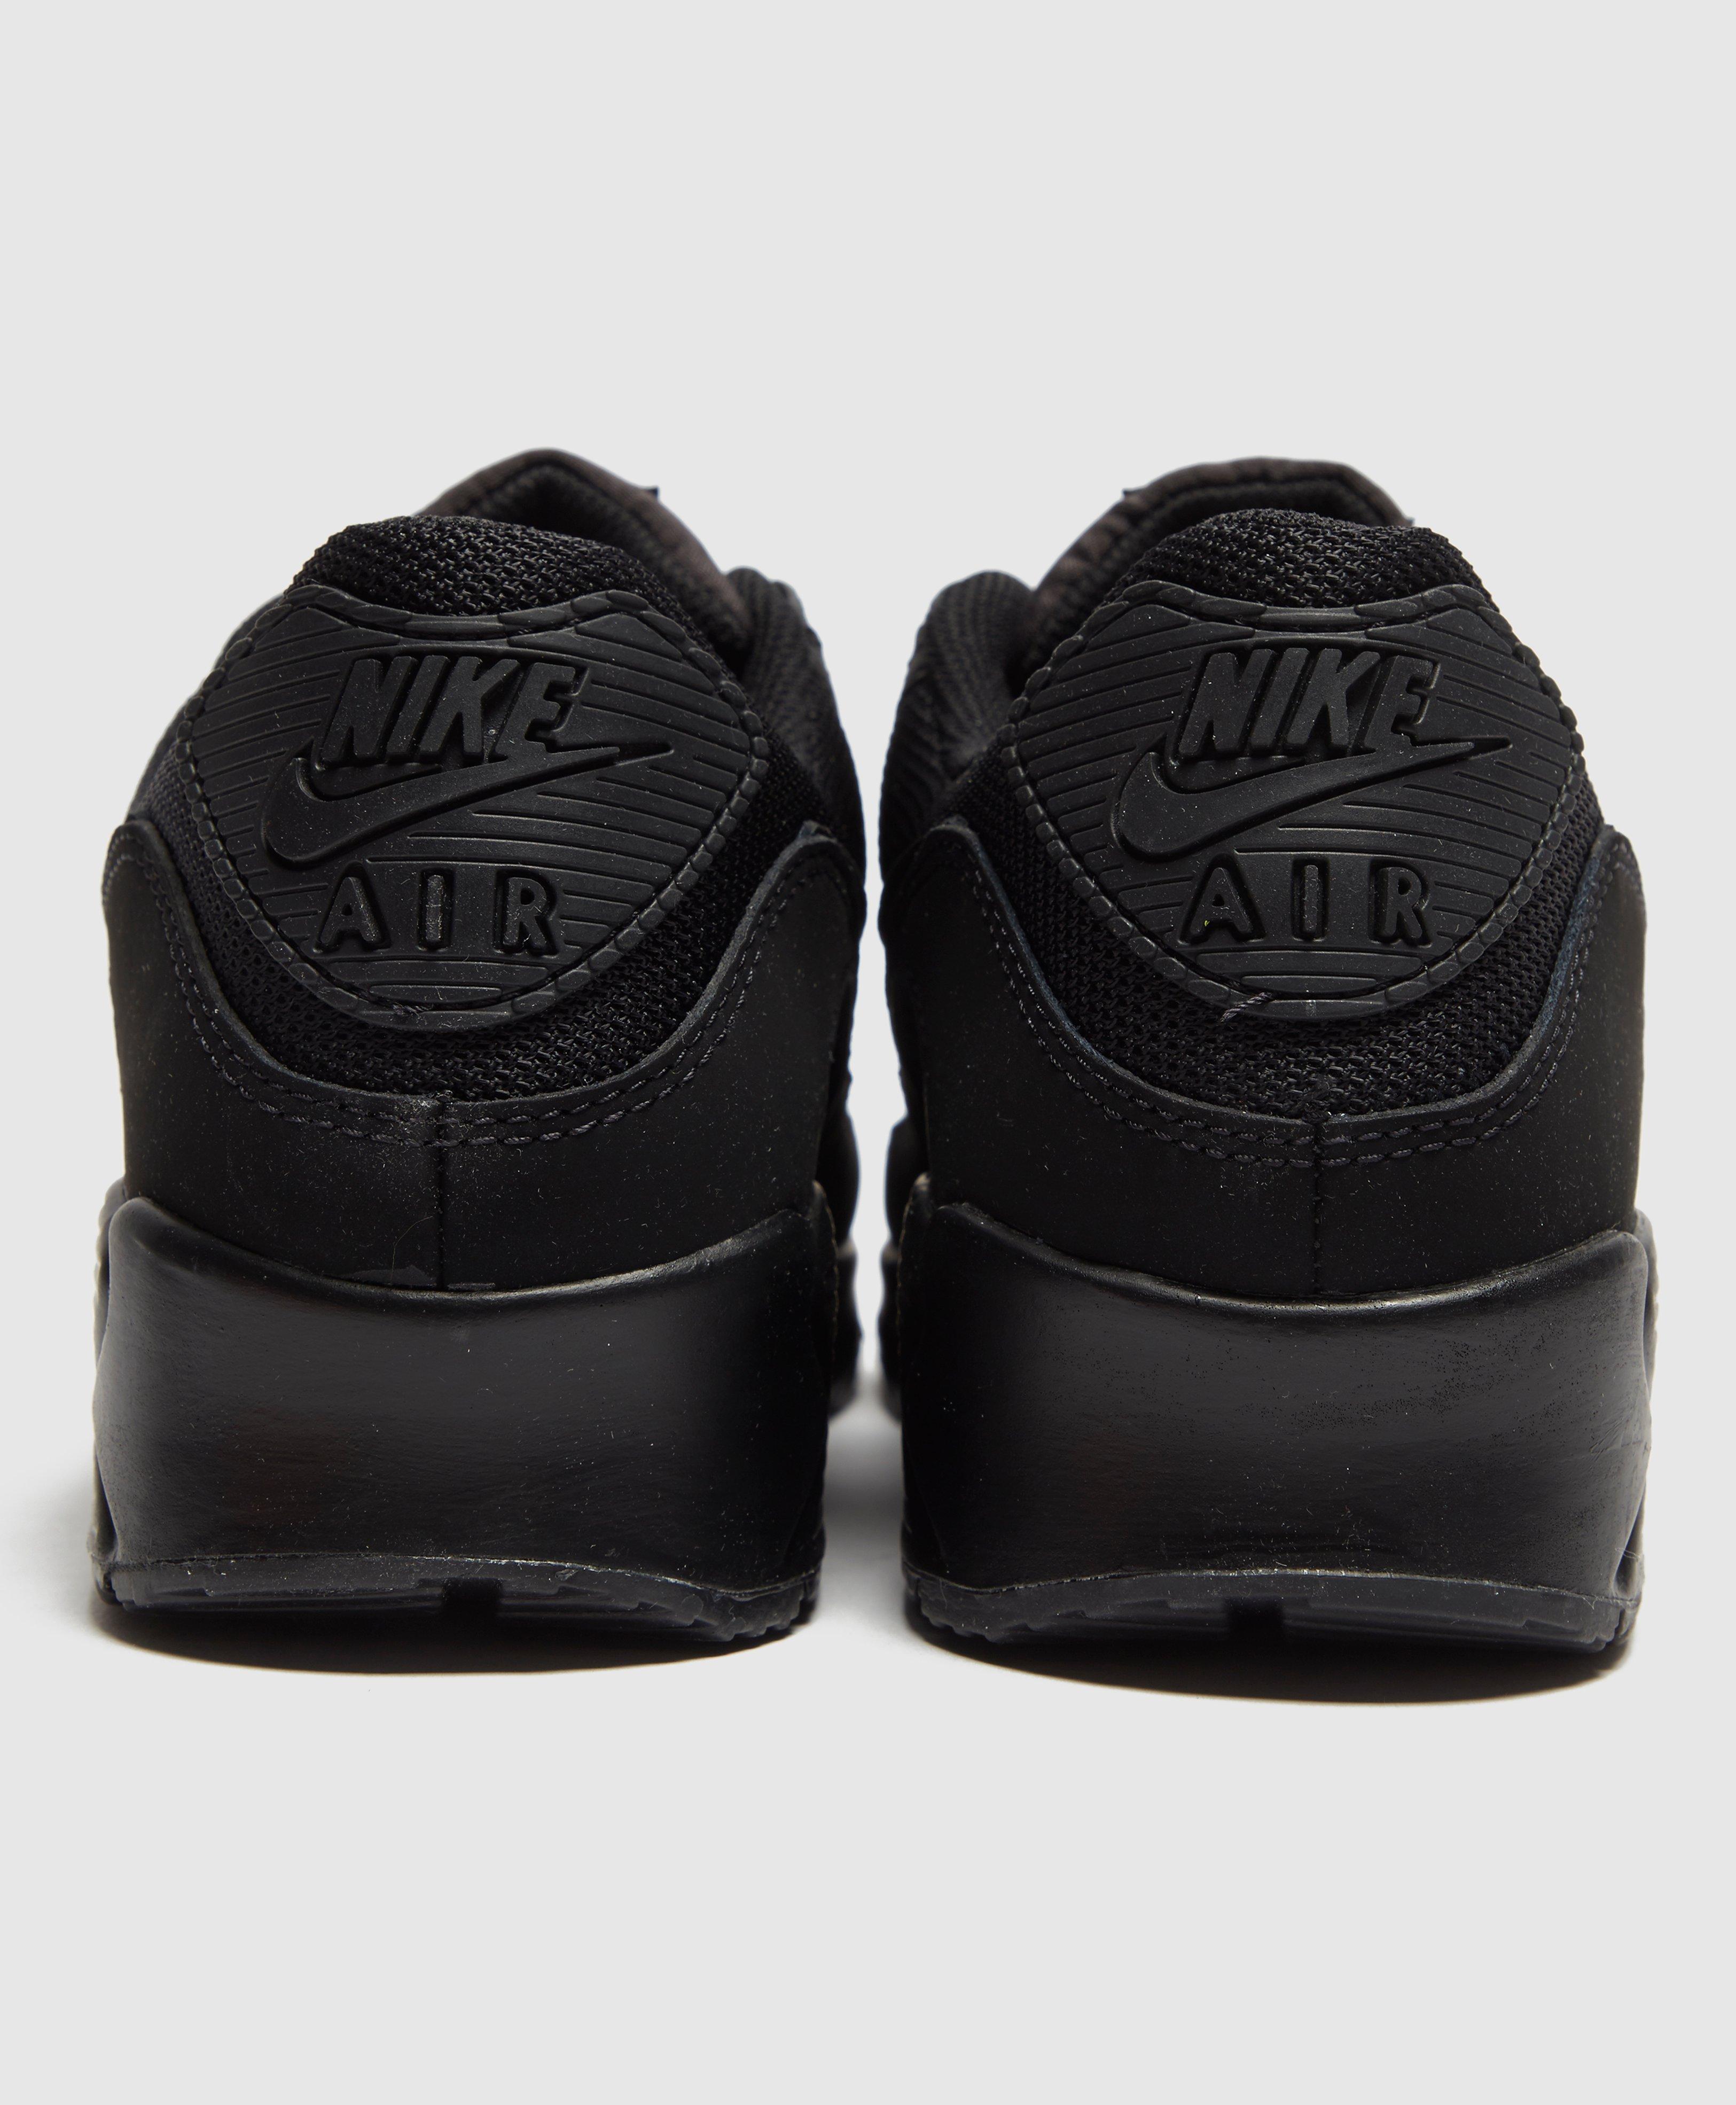 Nike Leather Air Max 90 Shoes in Black,Black,Black (Black) for Men - Save  55% - Lyst